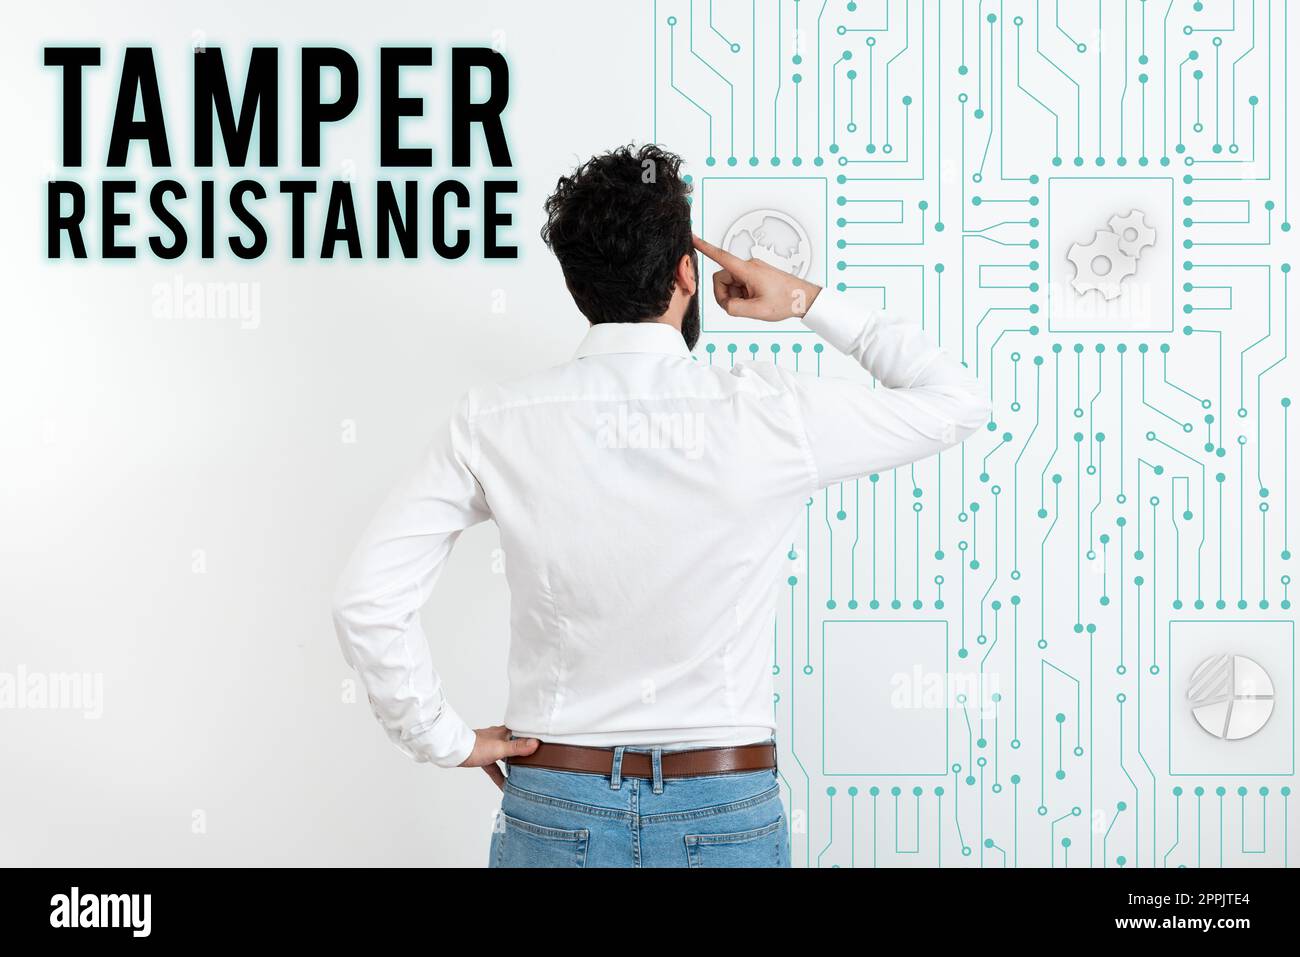 Text caption presenting Tamper Resistance. Business showcase resilent to physical harm, threats, intimidation, or corrupt persuasion Stock Photo